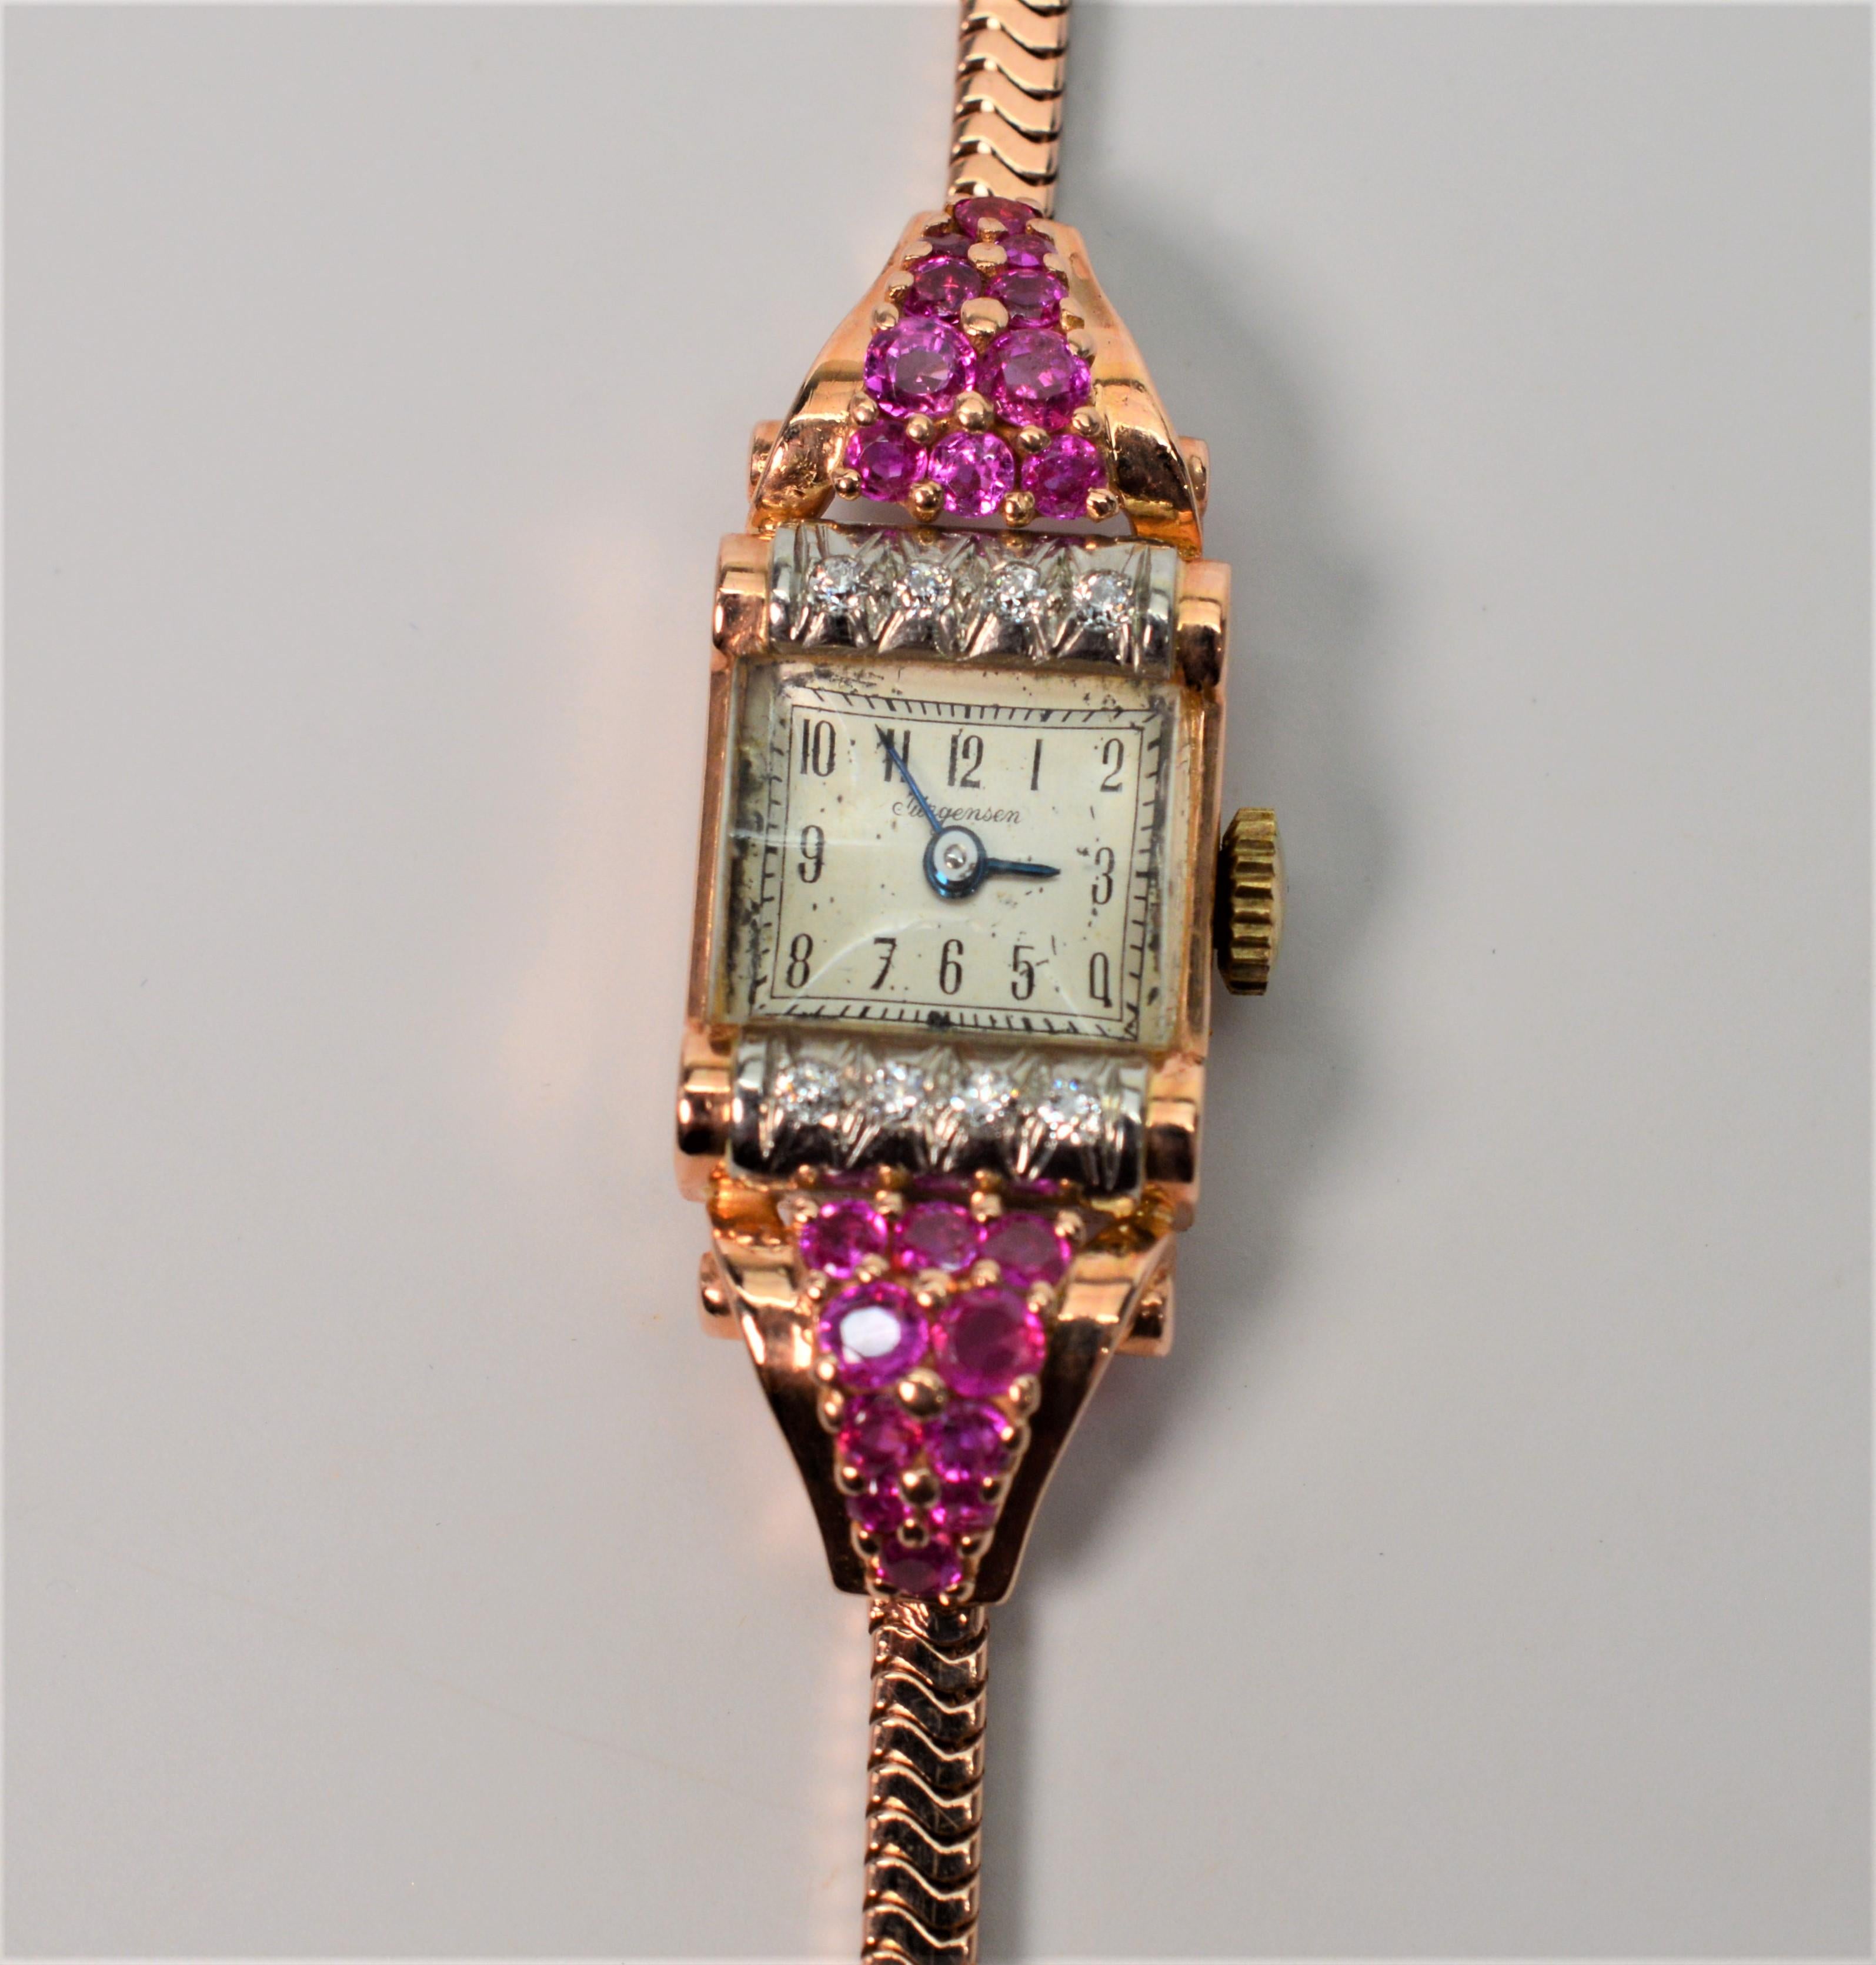 Circa 1950 Ladies 14 Karat Yellow Gold Bracelet Wrist Watch. The square face is flanked with .12 carats Diamonds total weight and .32 carats Rubies total weight. Movement is 17 Jewel JxJ. In working condition, this ultra feminine Jurgensen measures